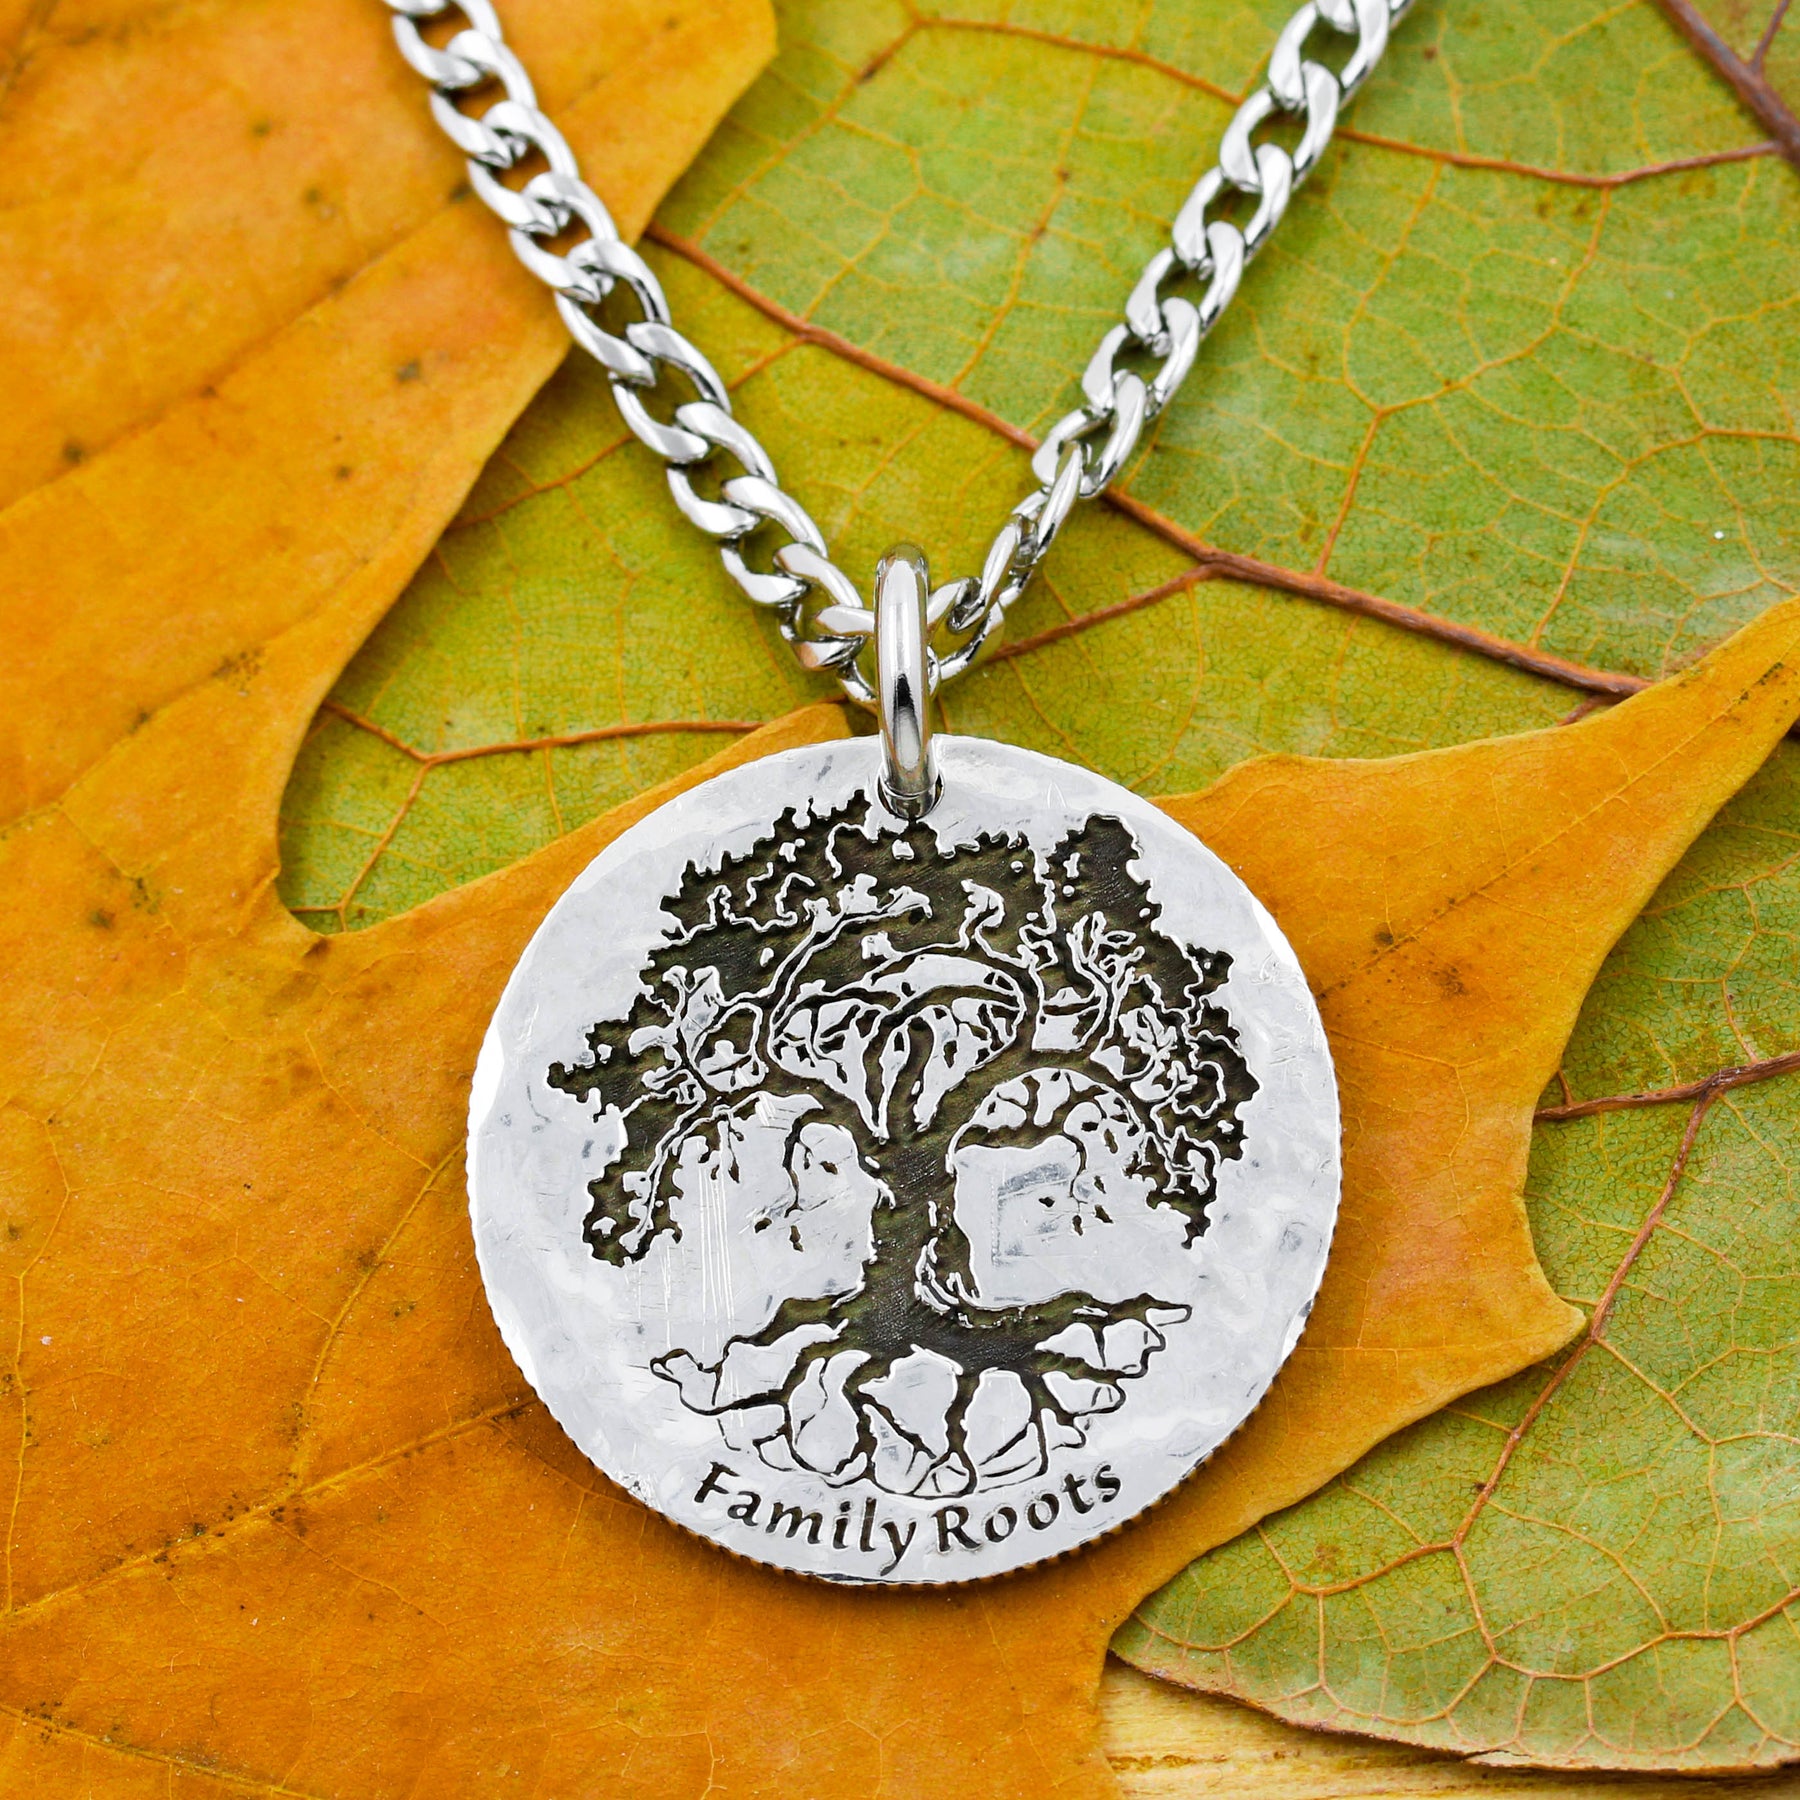 Shop All Cremation Jewelry – Oaktree Memorials